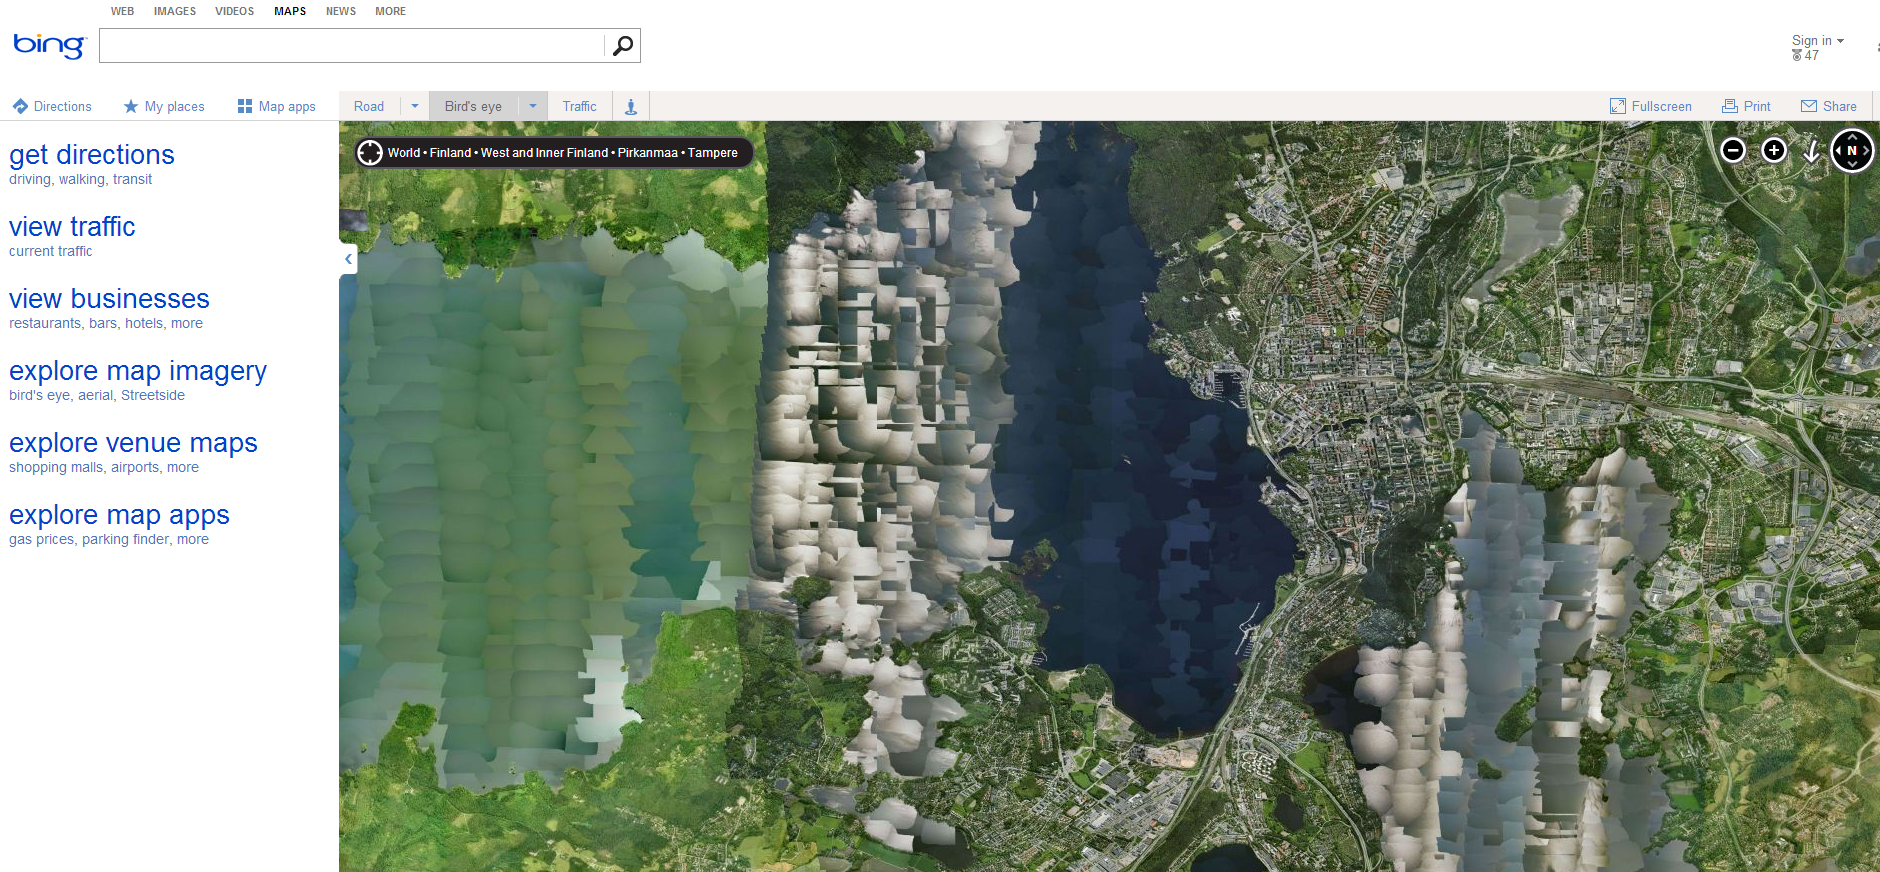 Bing increases bird's-eye data significantly in update to Bing Maps ...